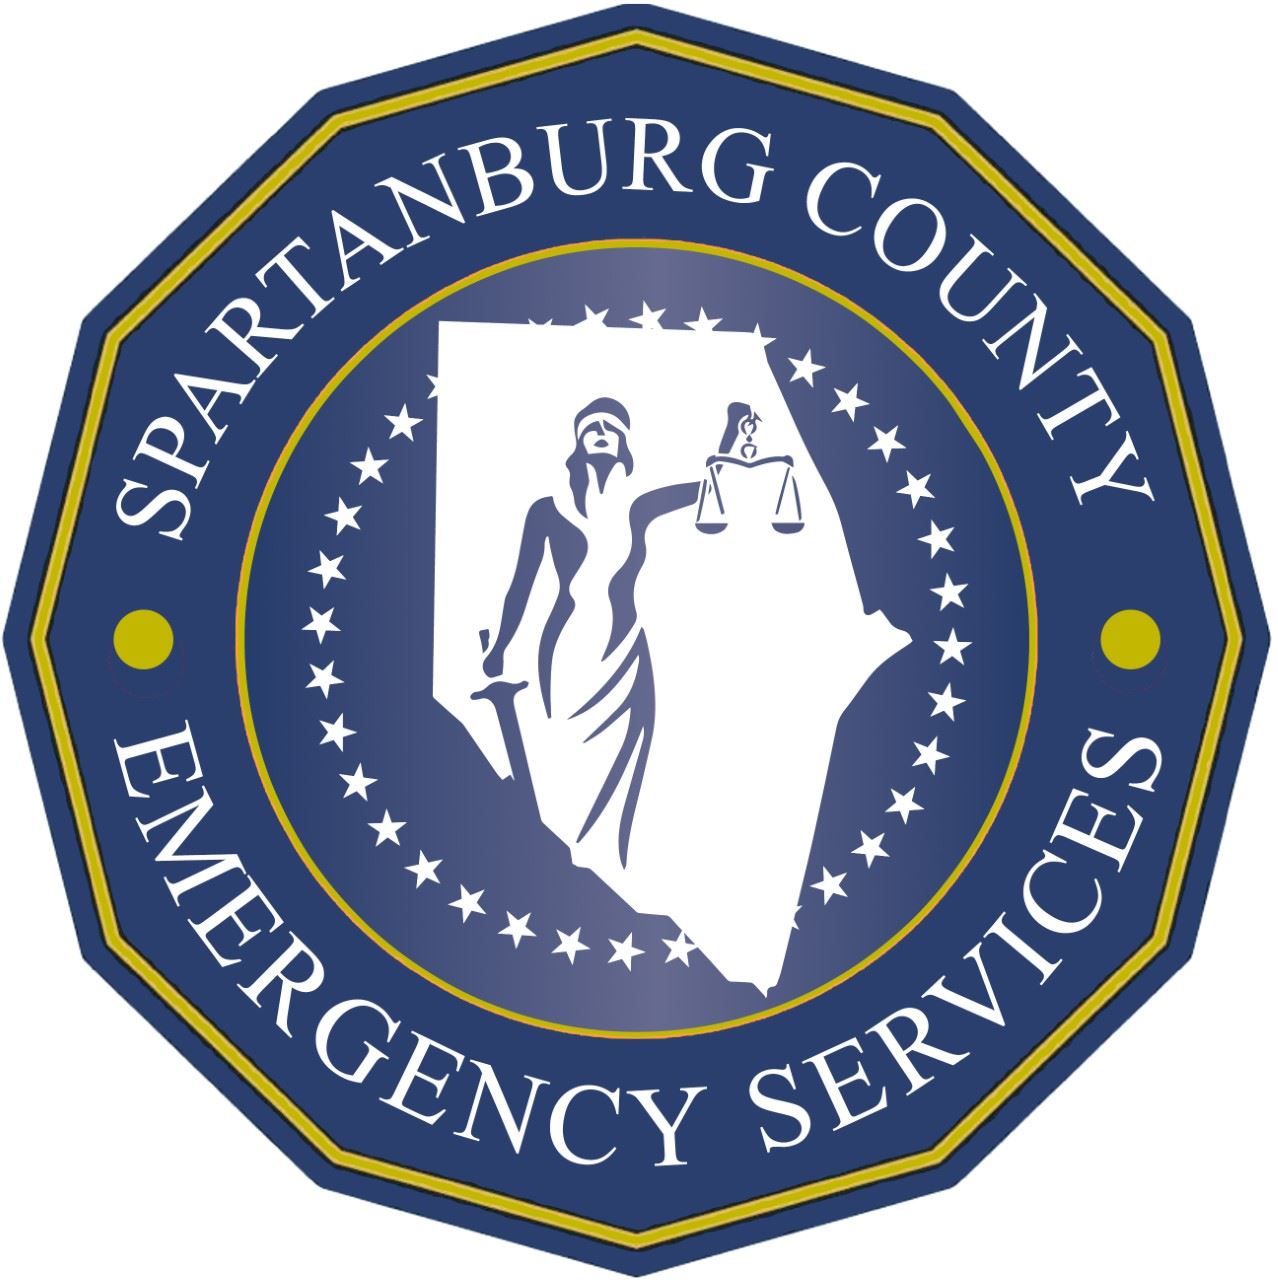 Spartanburg County Emergency Services